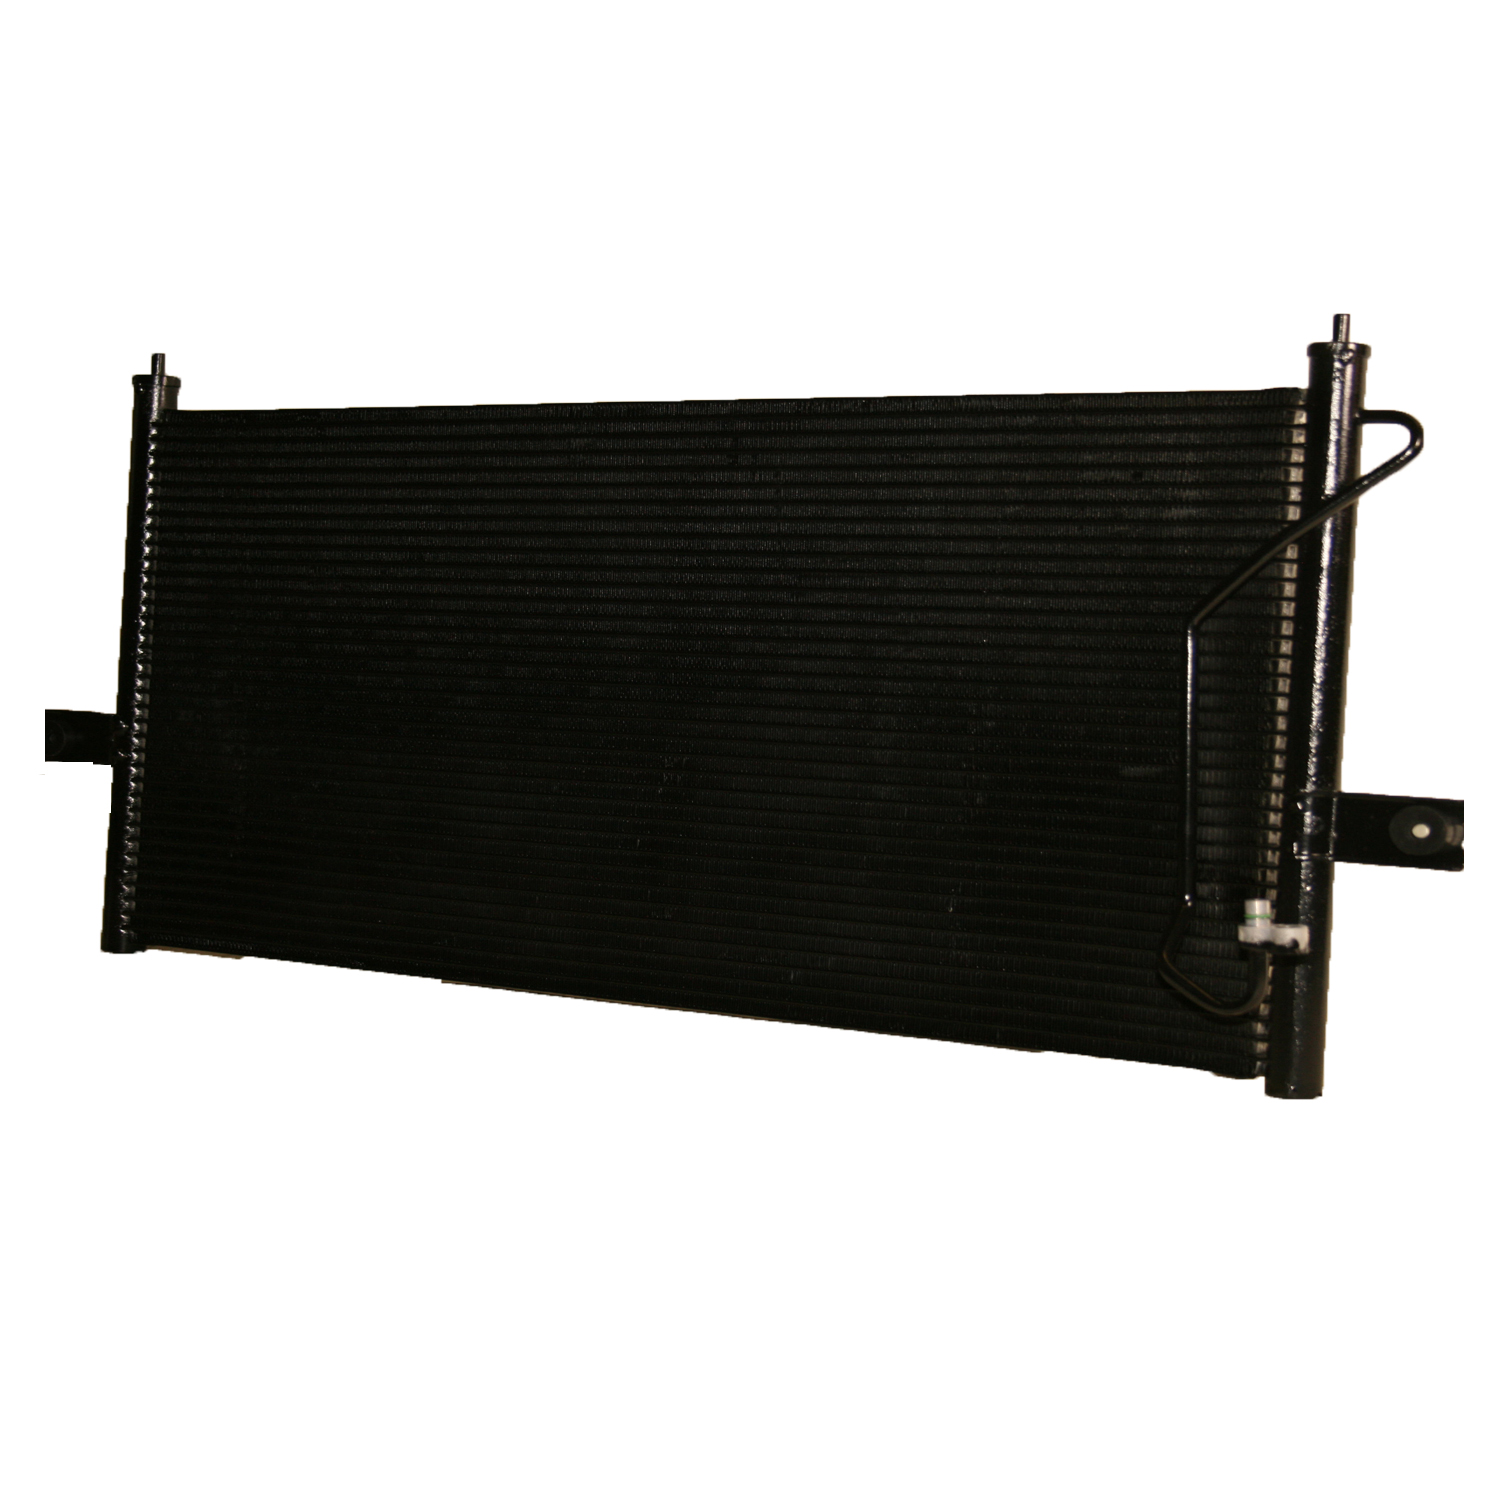 TCW Condenser 44-4978 New Product Image field_60b6a13a6e67c